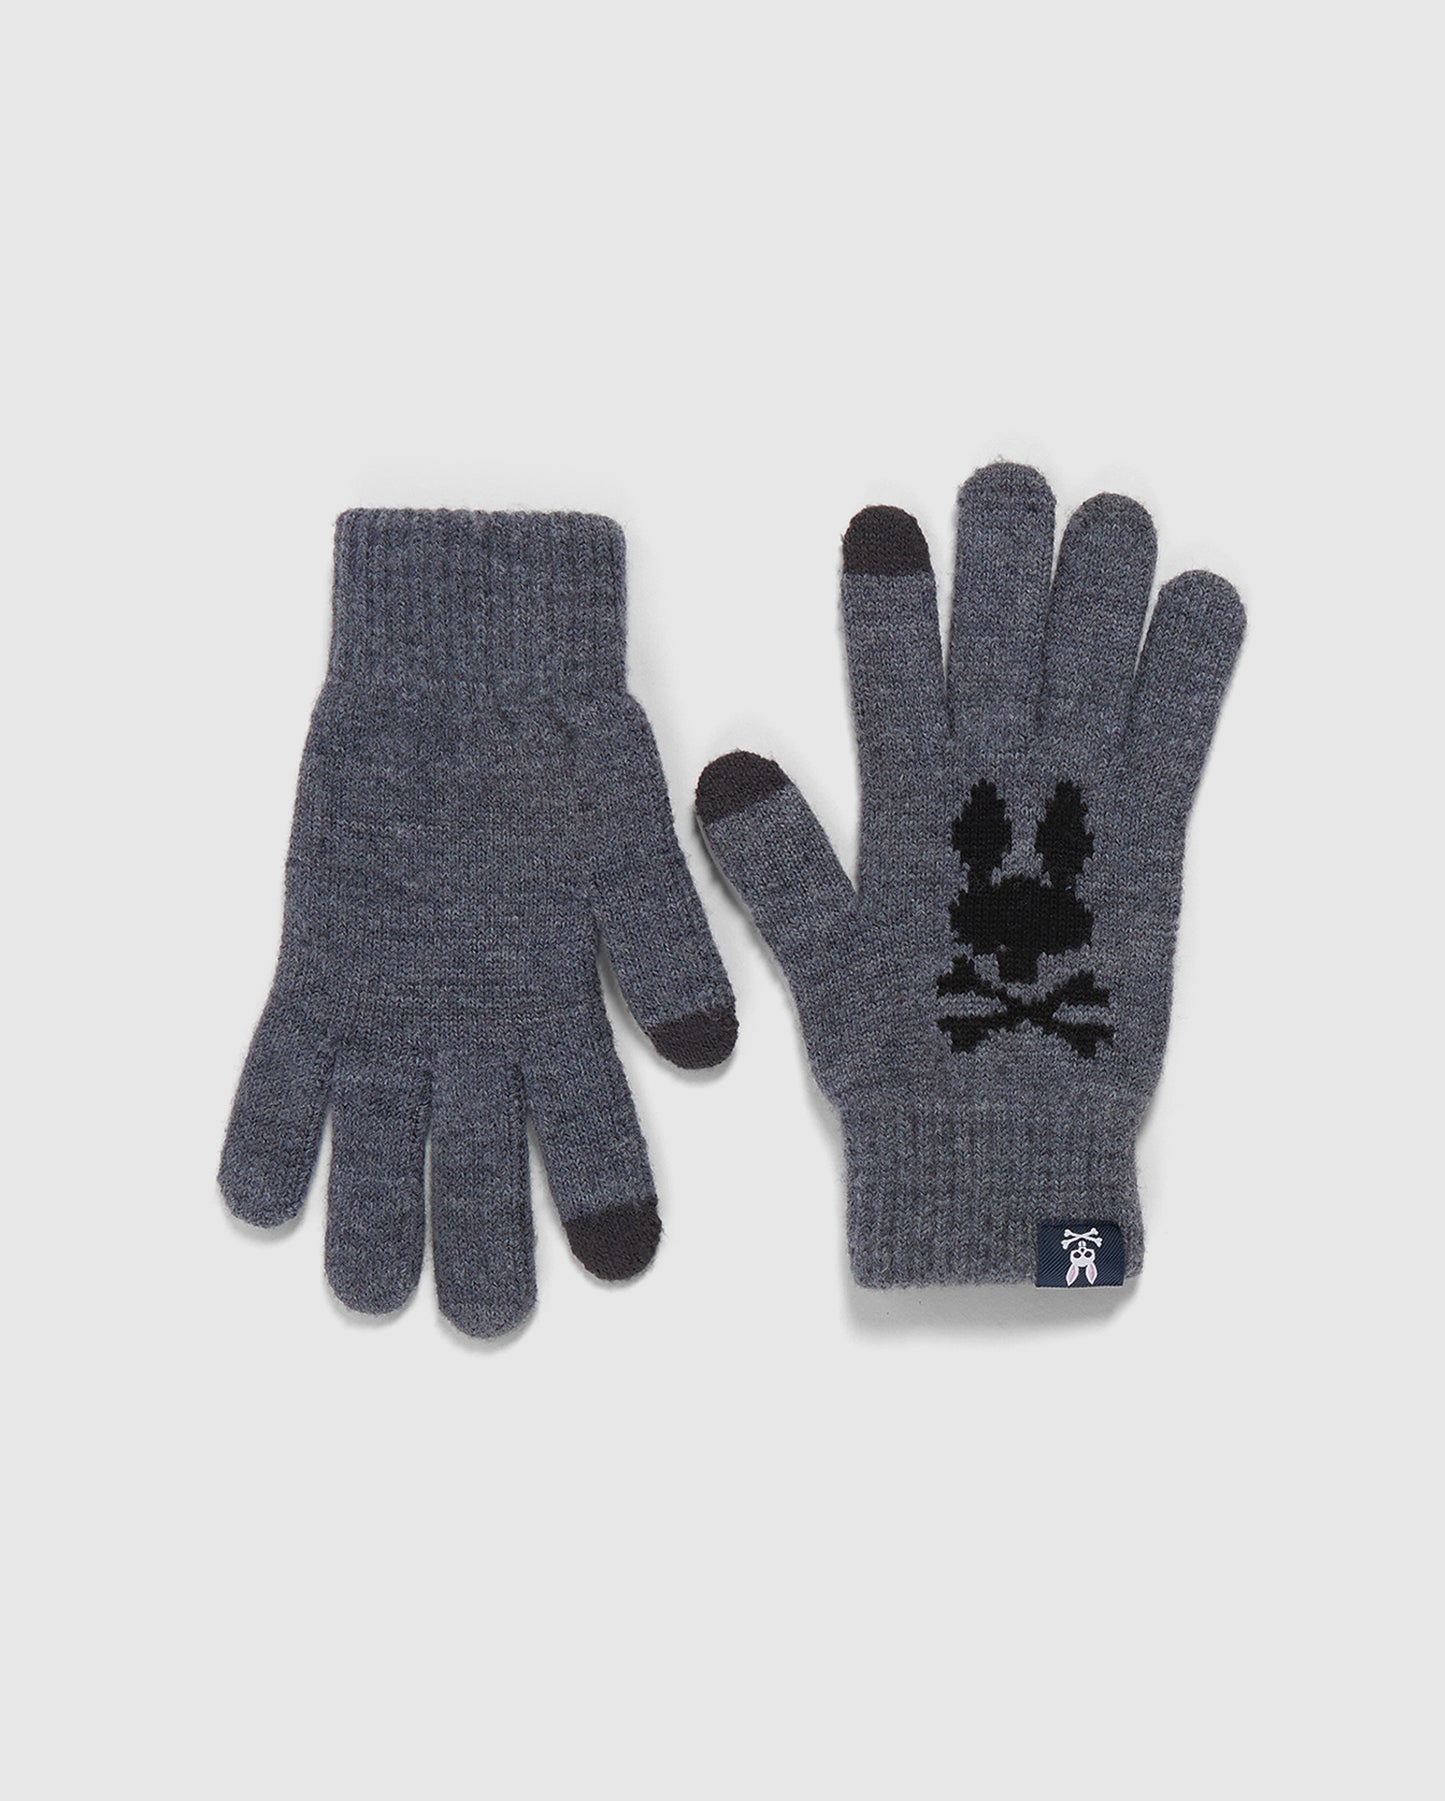 MENS WOOL GLOVES WITH GREY FINGER TOUCH- B6A998U1GL | Handschuhe